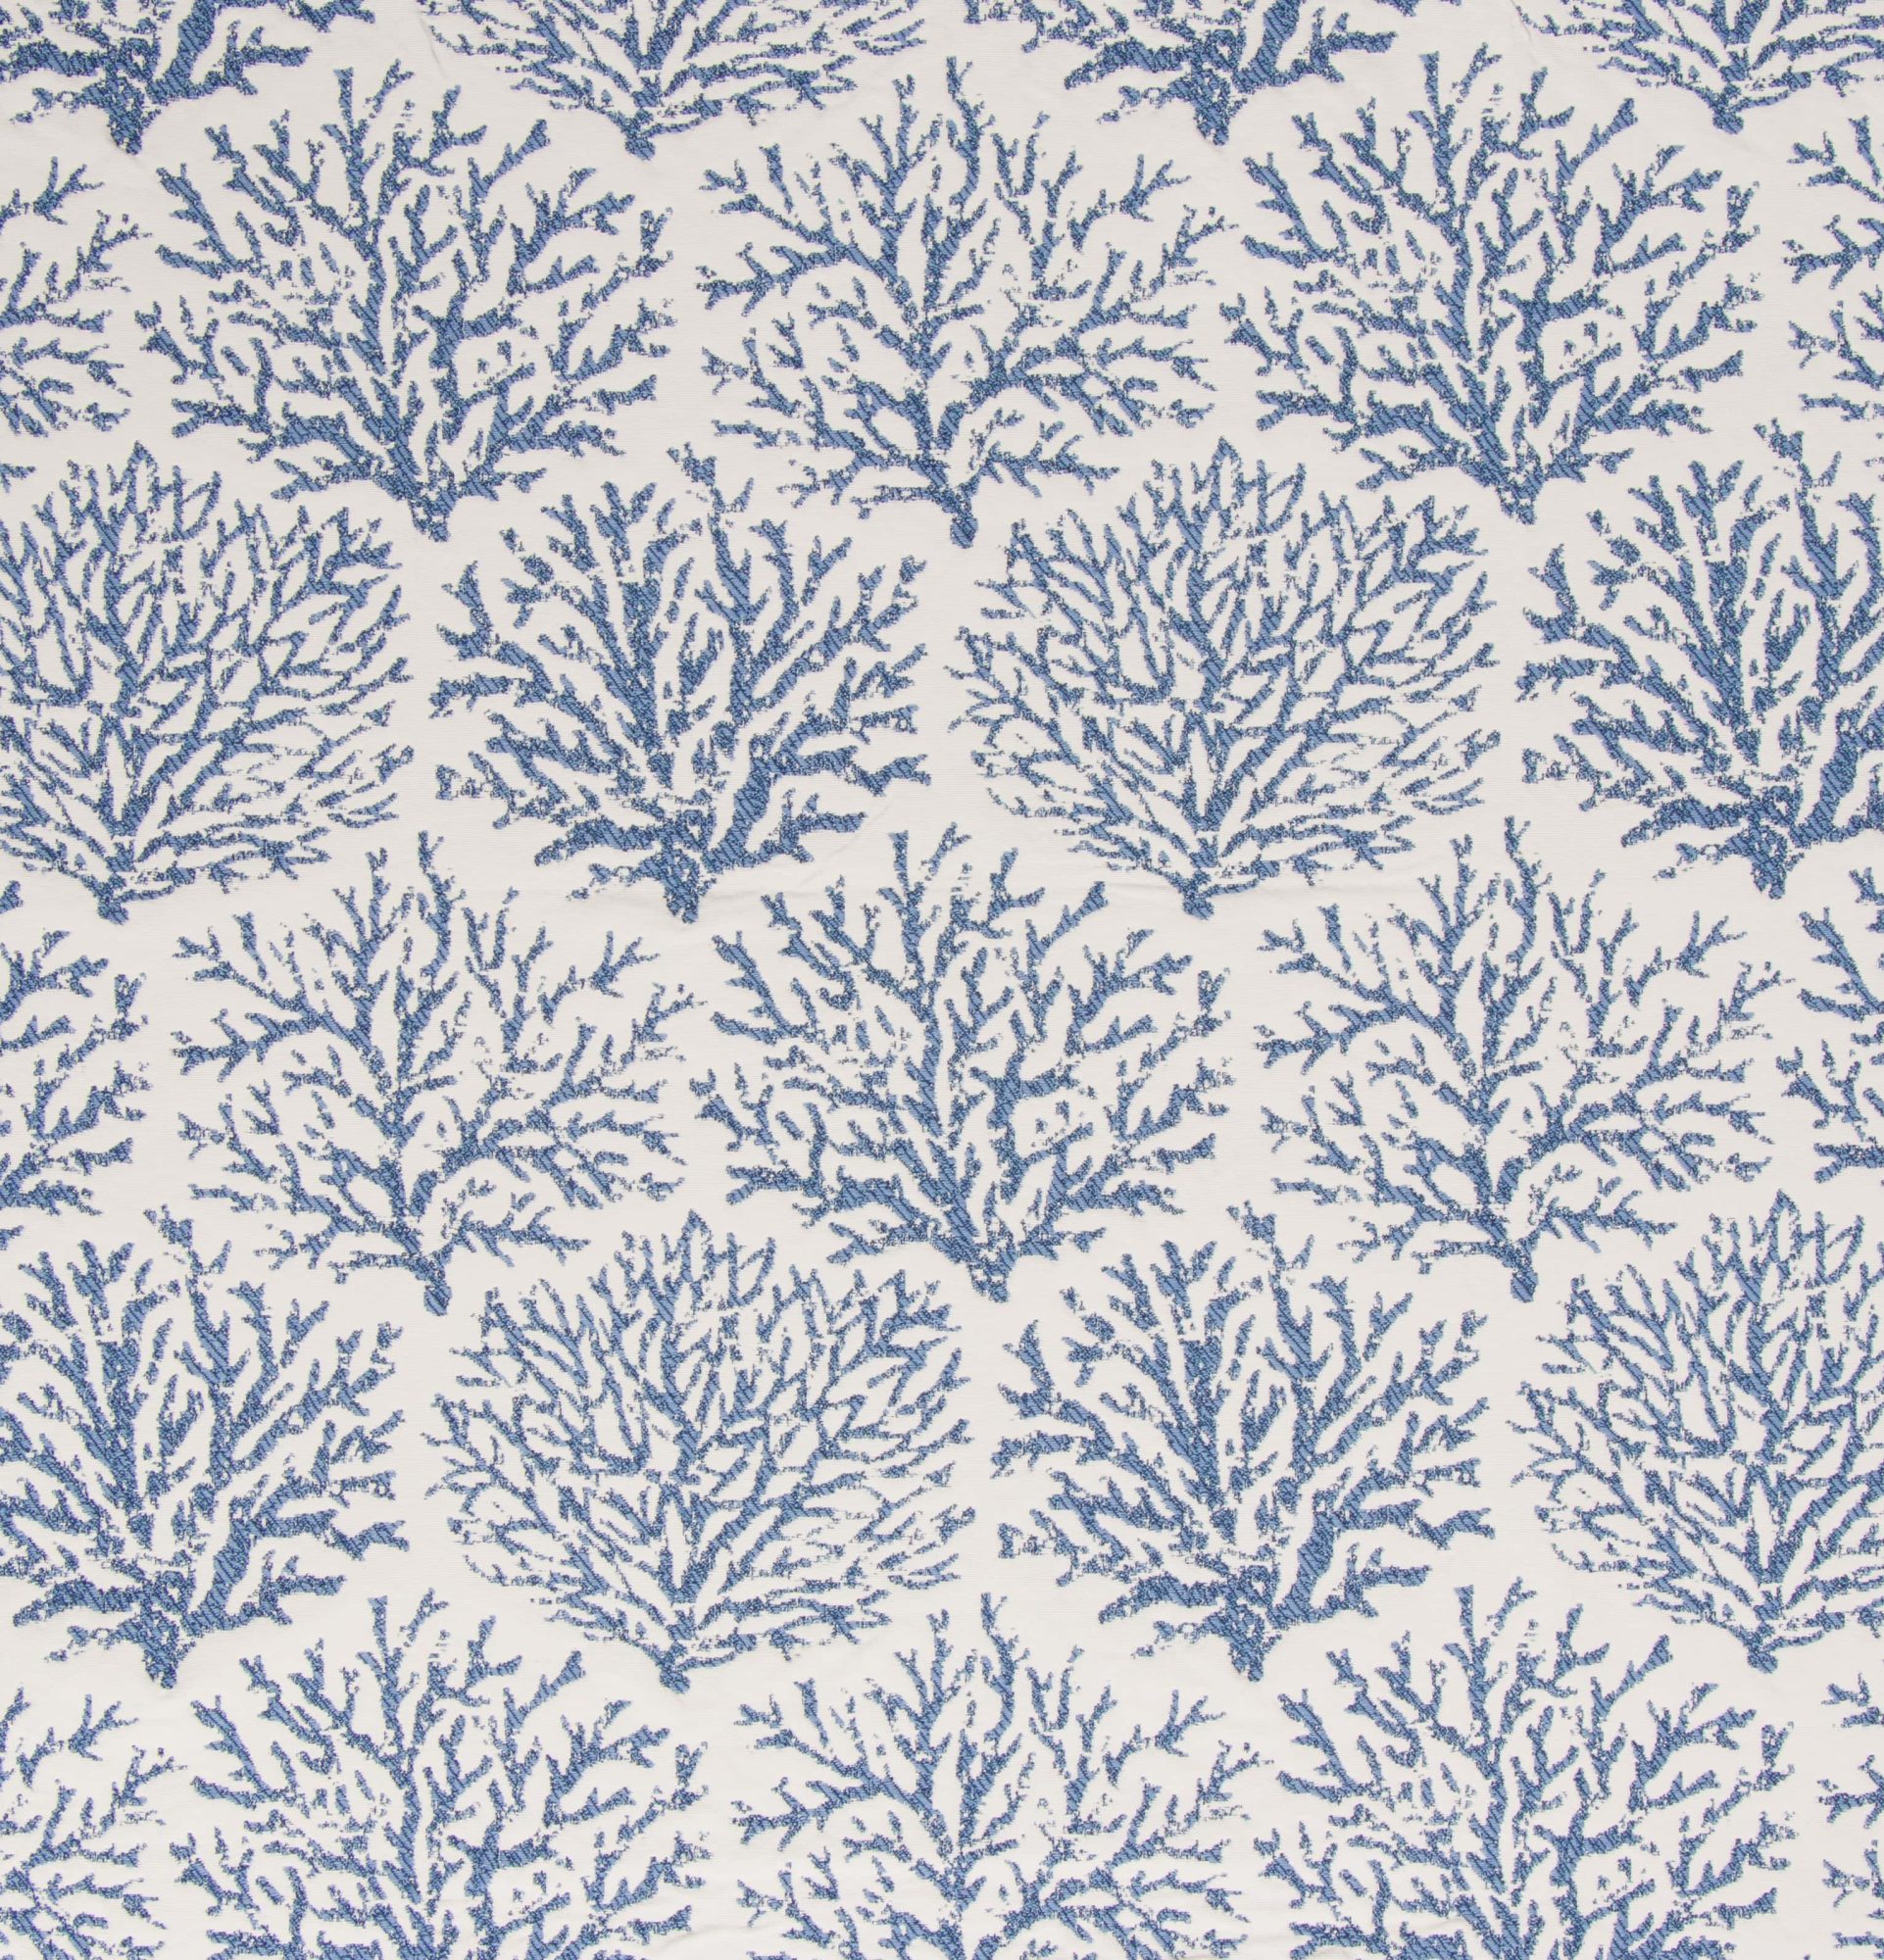 Cut yardage from Bella Dura and Bella Dura Home in the pattern Coraline and color Denim.